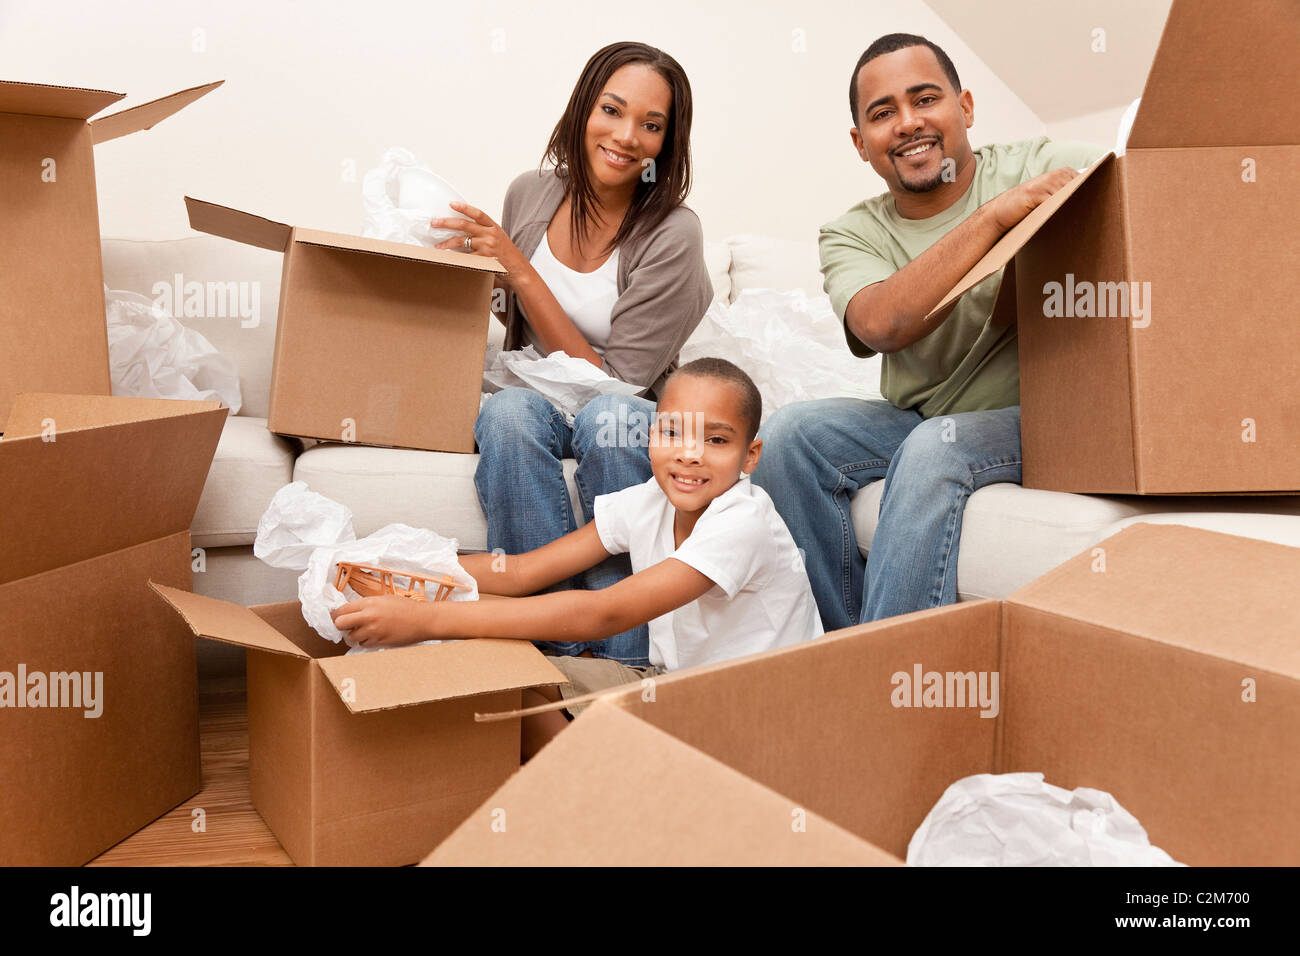 African American family, parents and son, unpacking boxes and moving into a new home Stock Photo